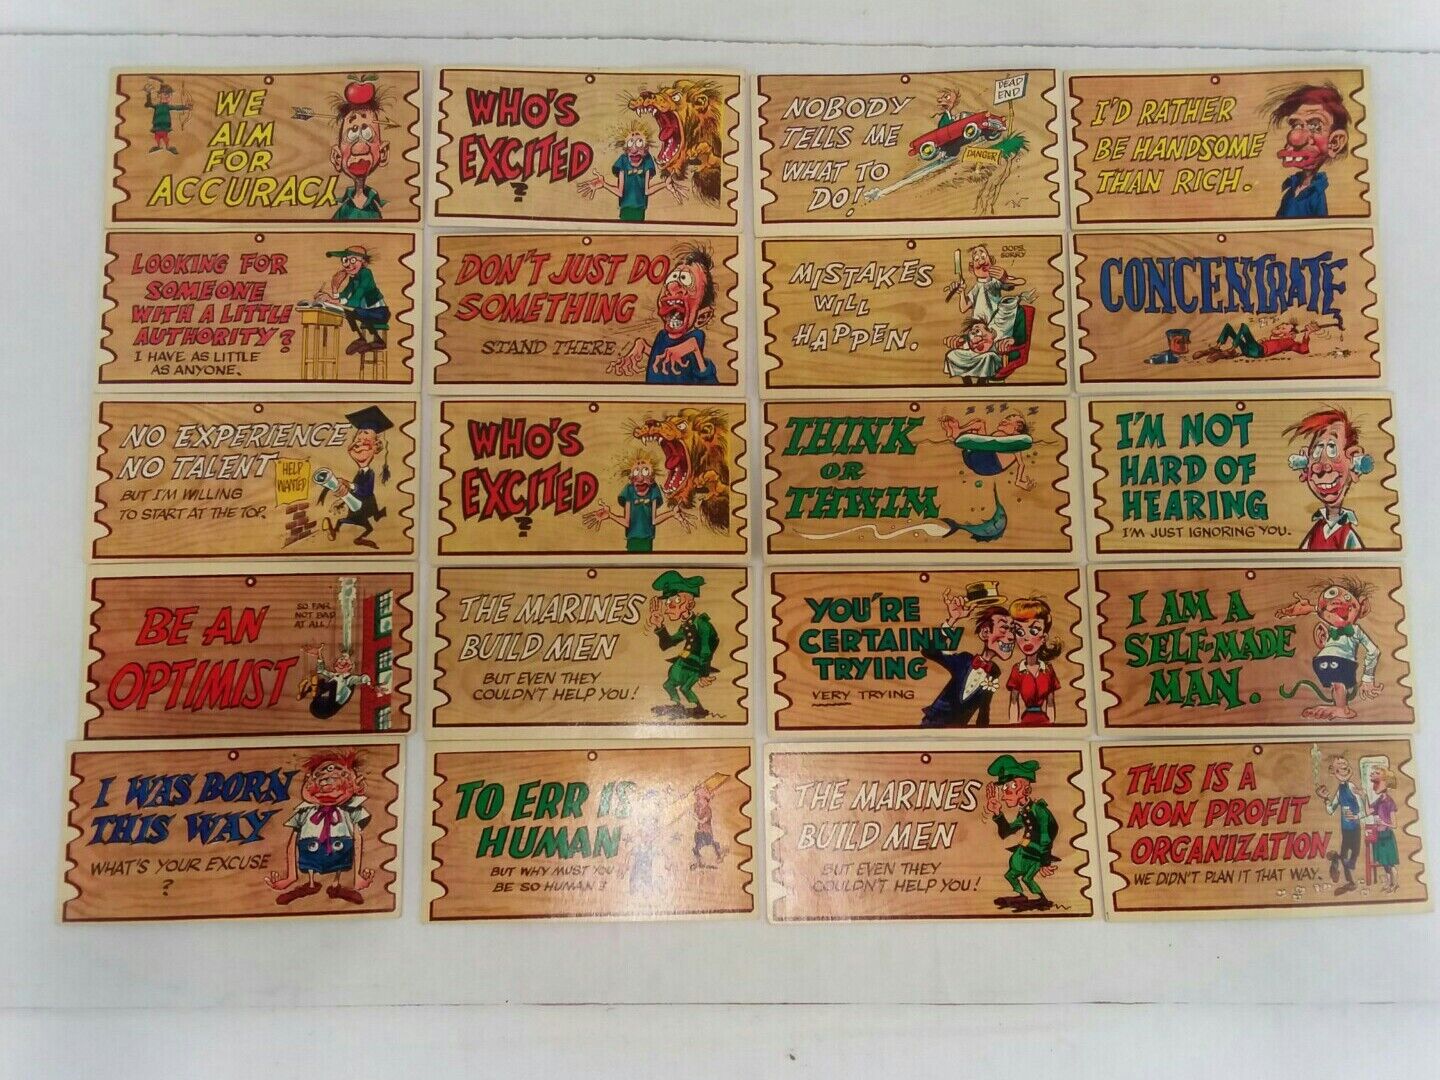 1959 TOPPS WACKY PLAK POST CARDS 20  DIFFERENT. Rare unused cards. Nice